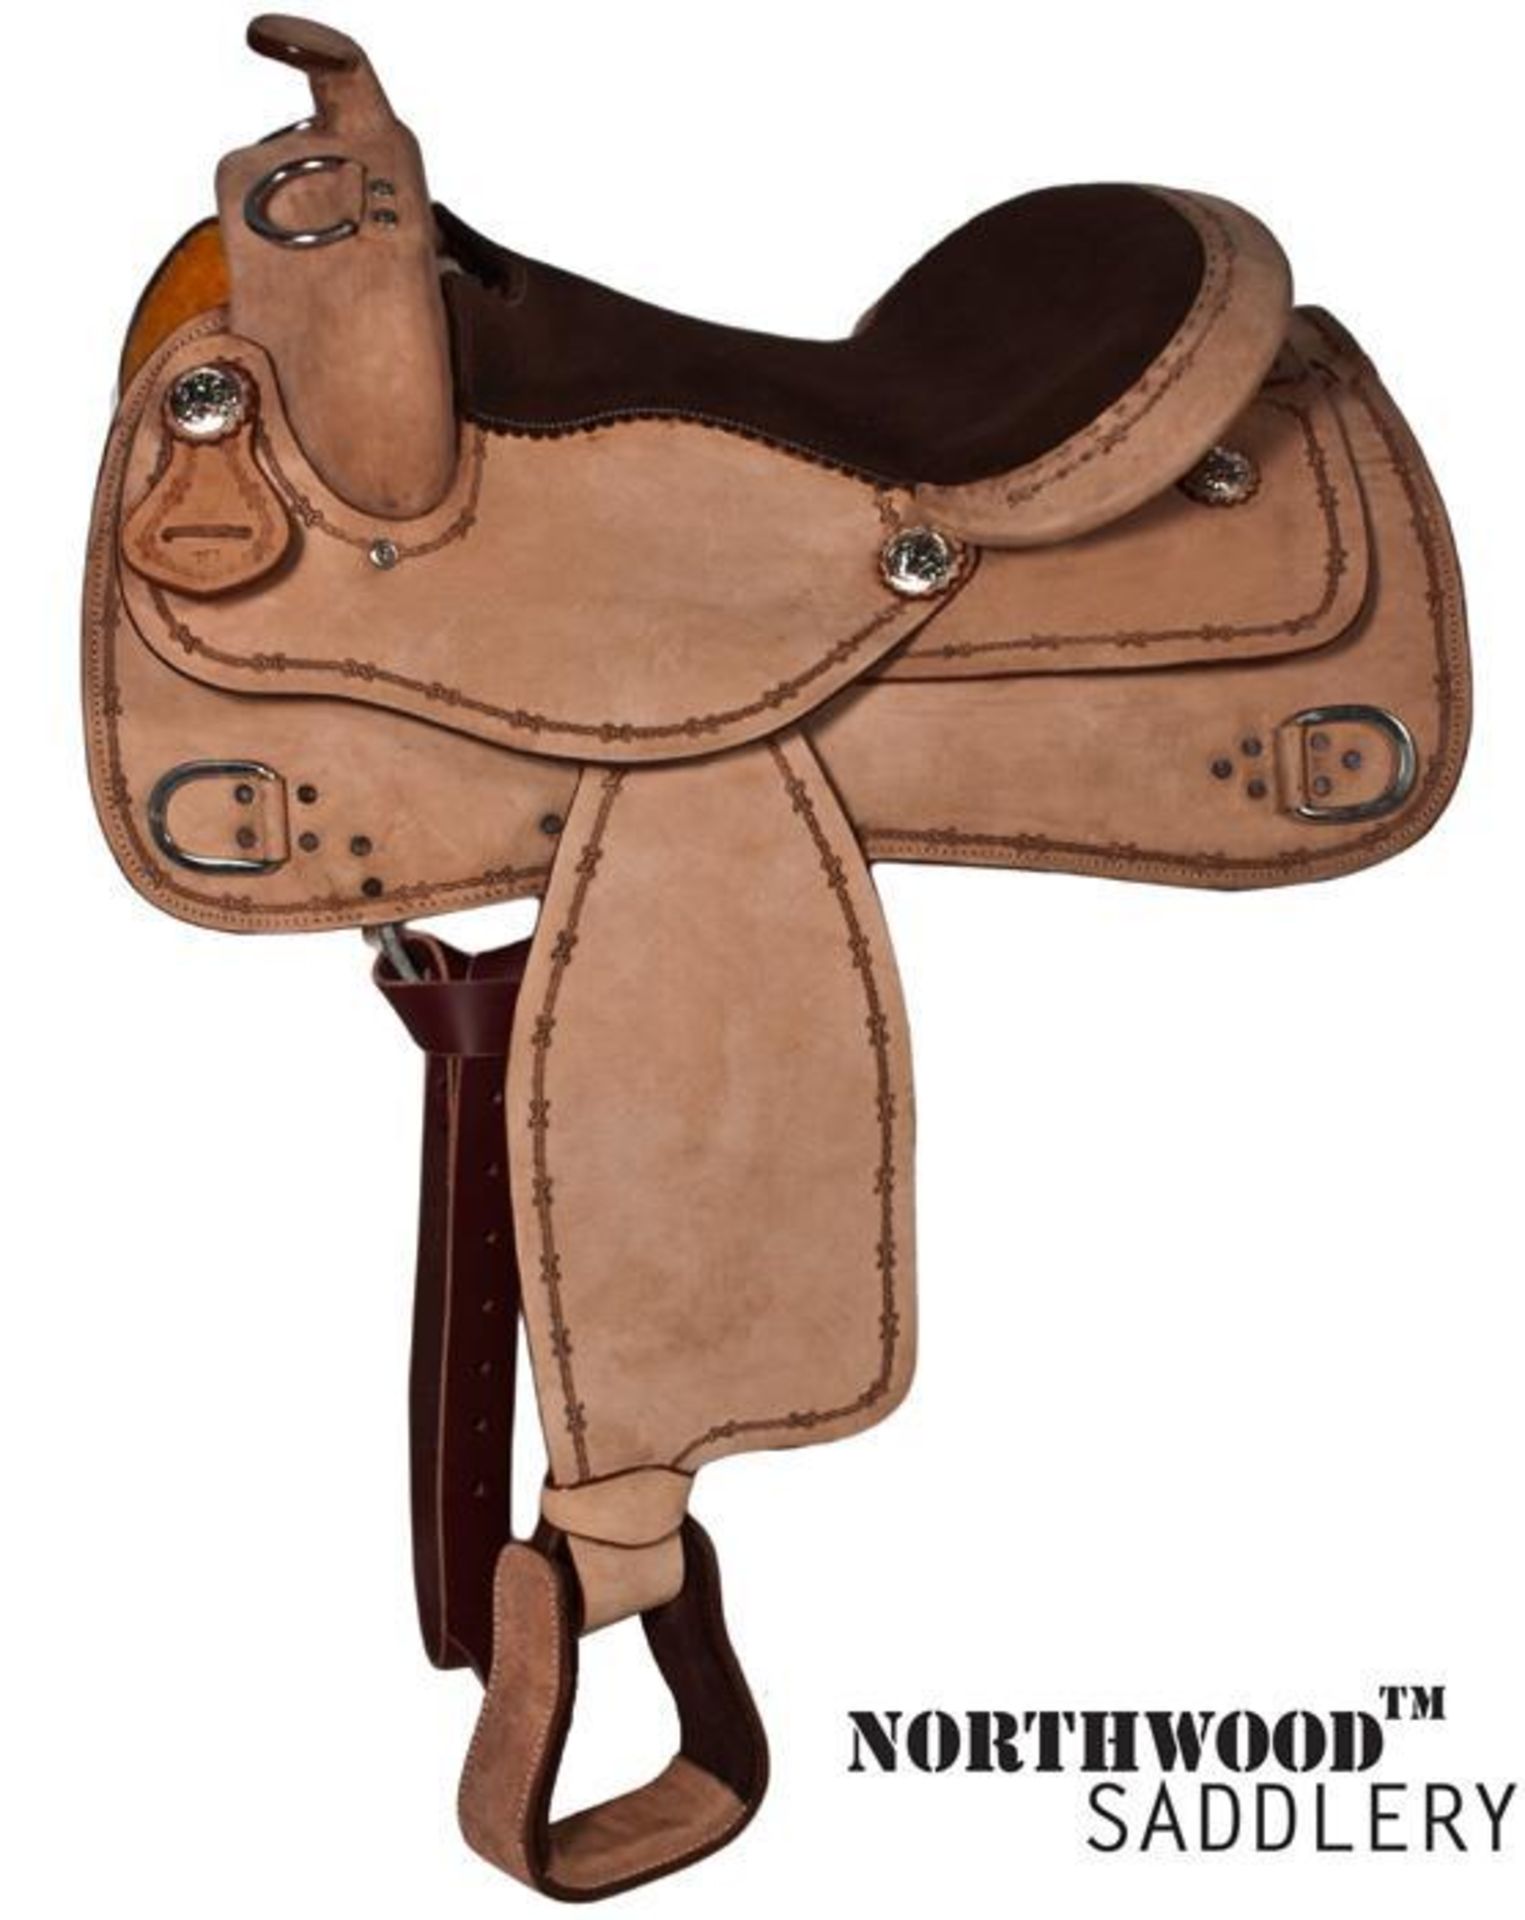 Brand: NorthWoodTM Saddlery  Made with X-GEN Tree Pro Fit        Premium grade rough out leather